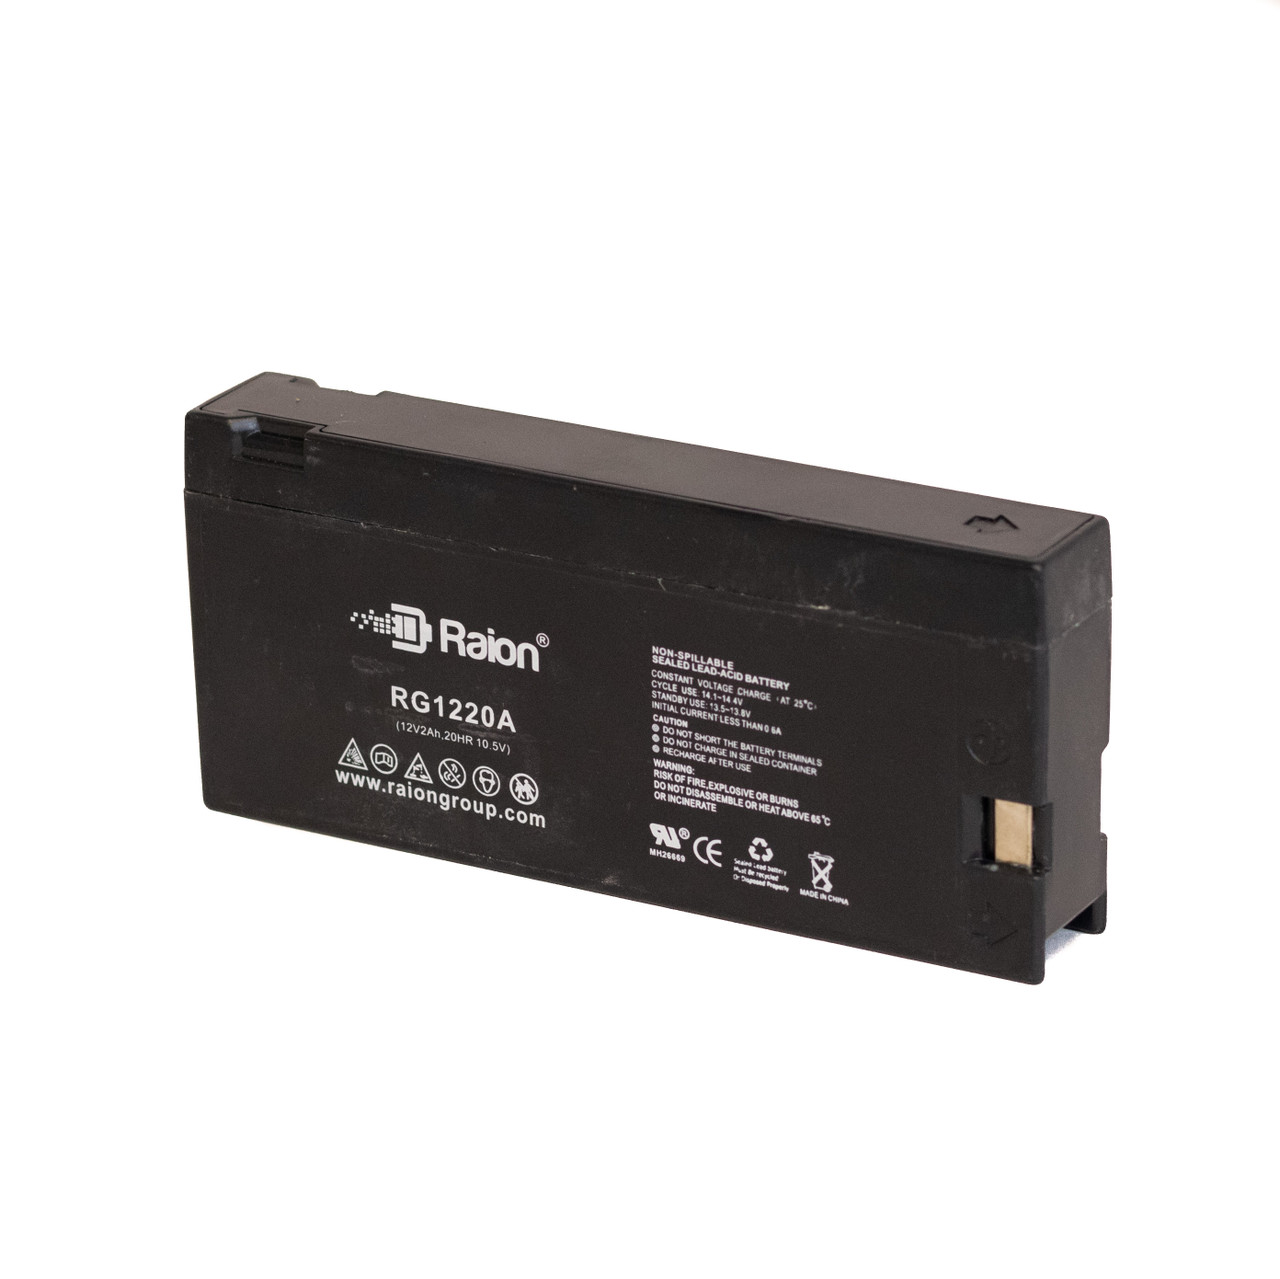 Raion Power RG1220A Replacement Battery for Sylvania VRC-210